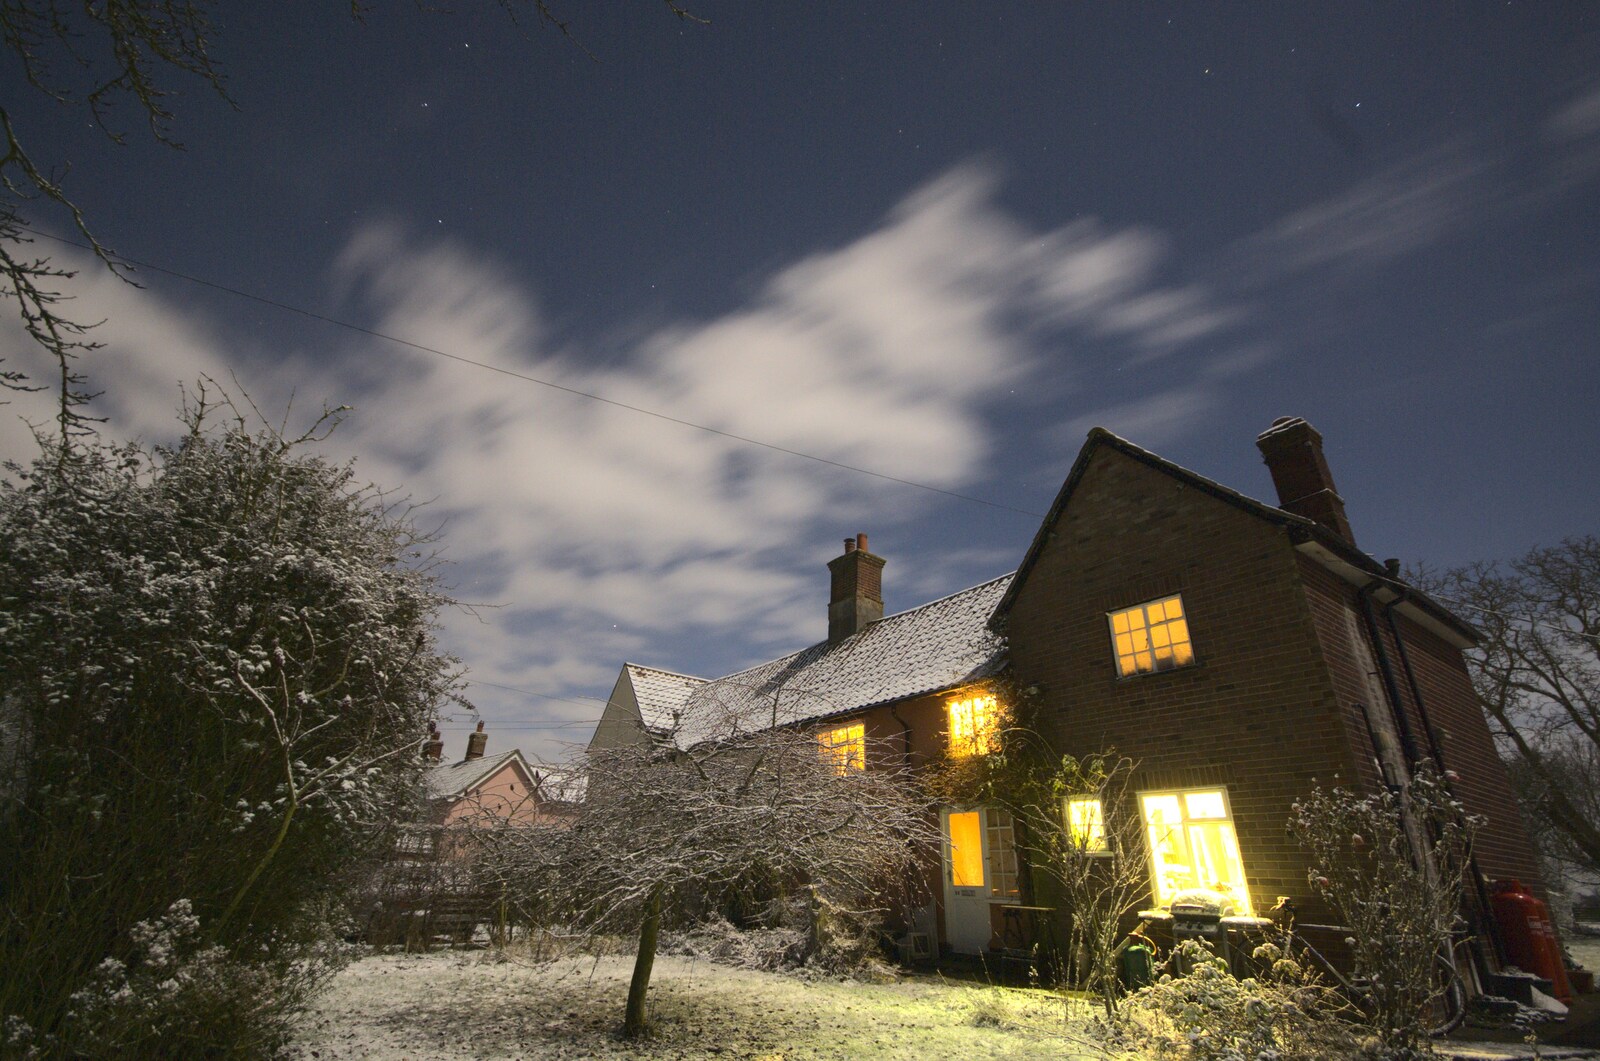 The house is all lit up from New Year's Eve at the Swan Inn, and Moonlight Photos, Brome, Suffolk - 31st December 2009